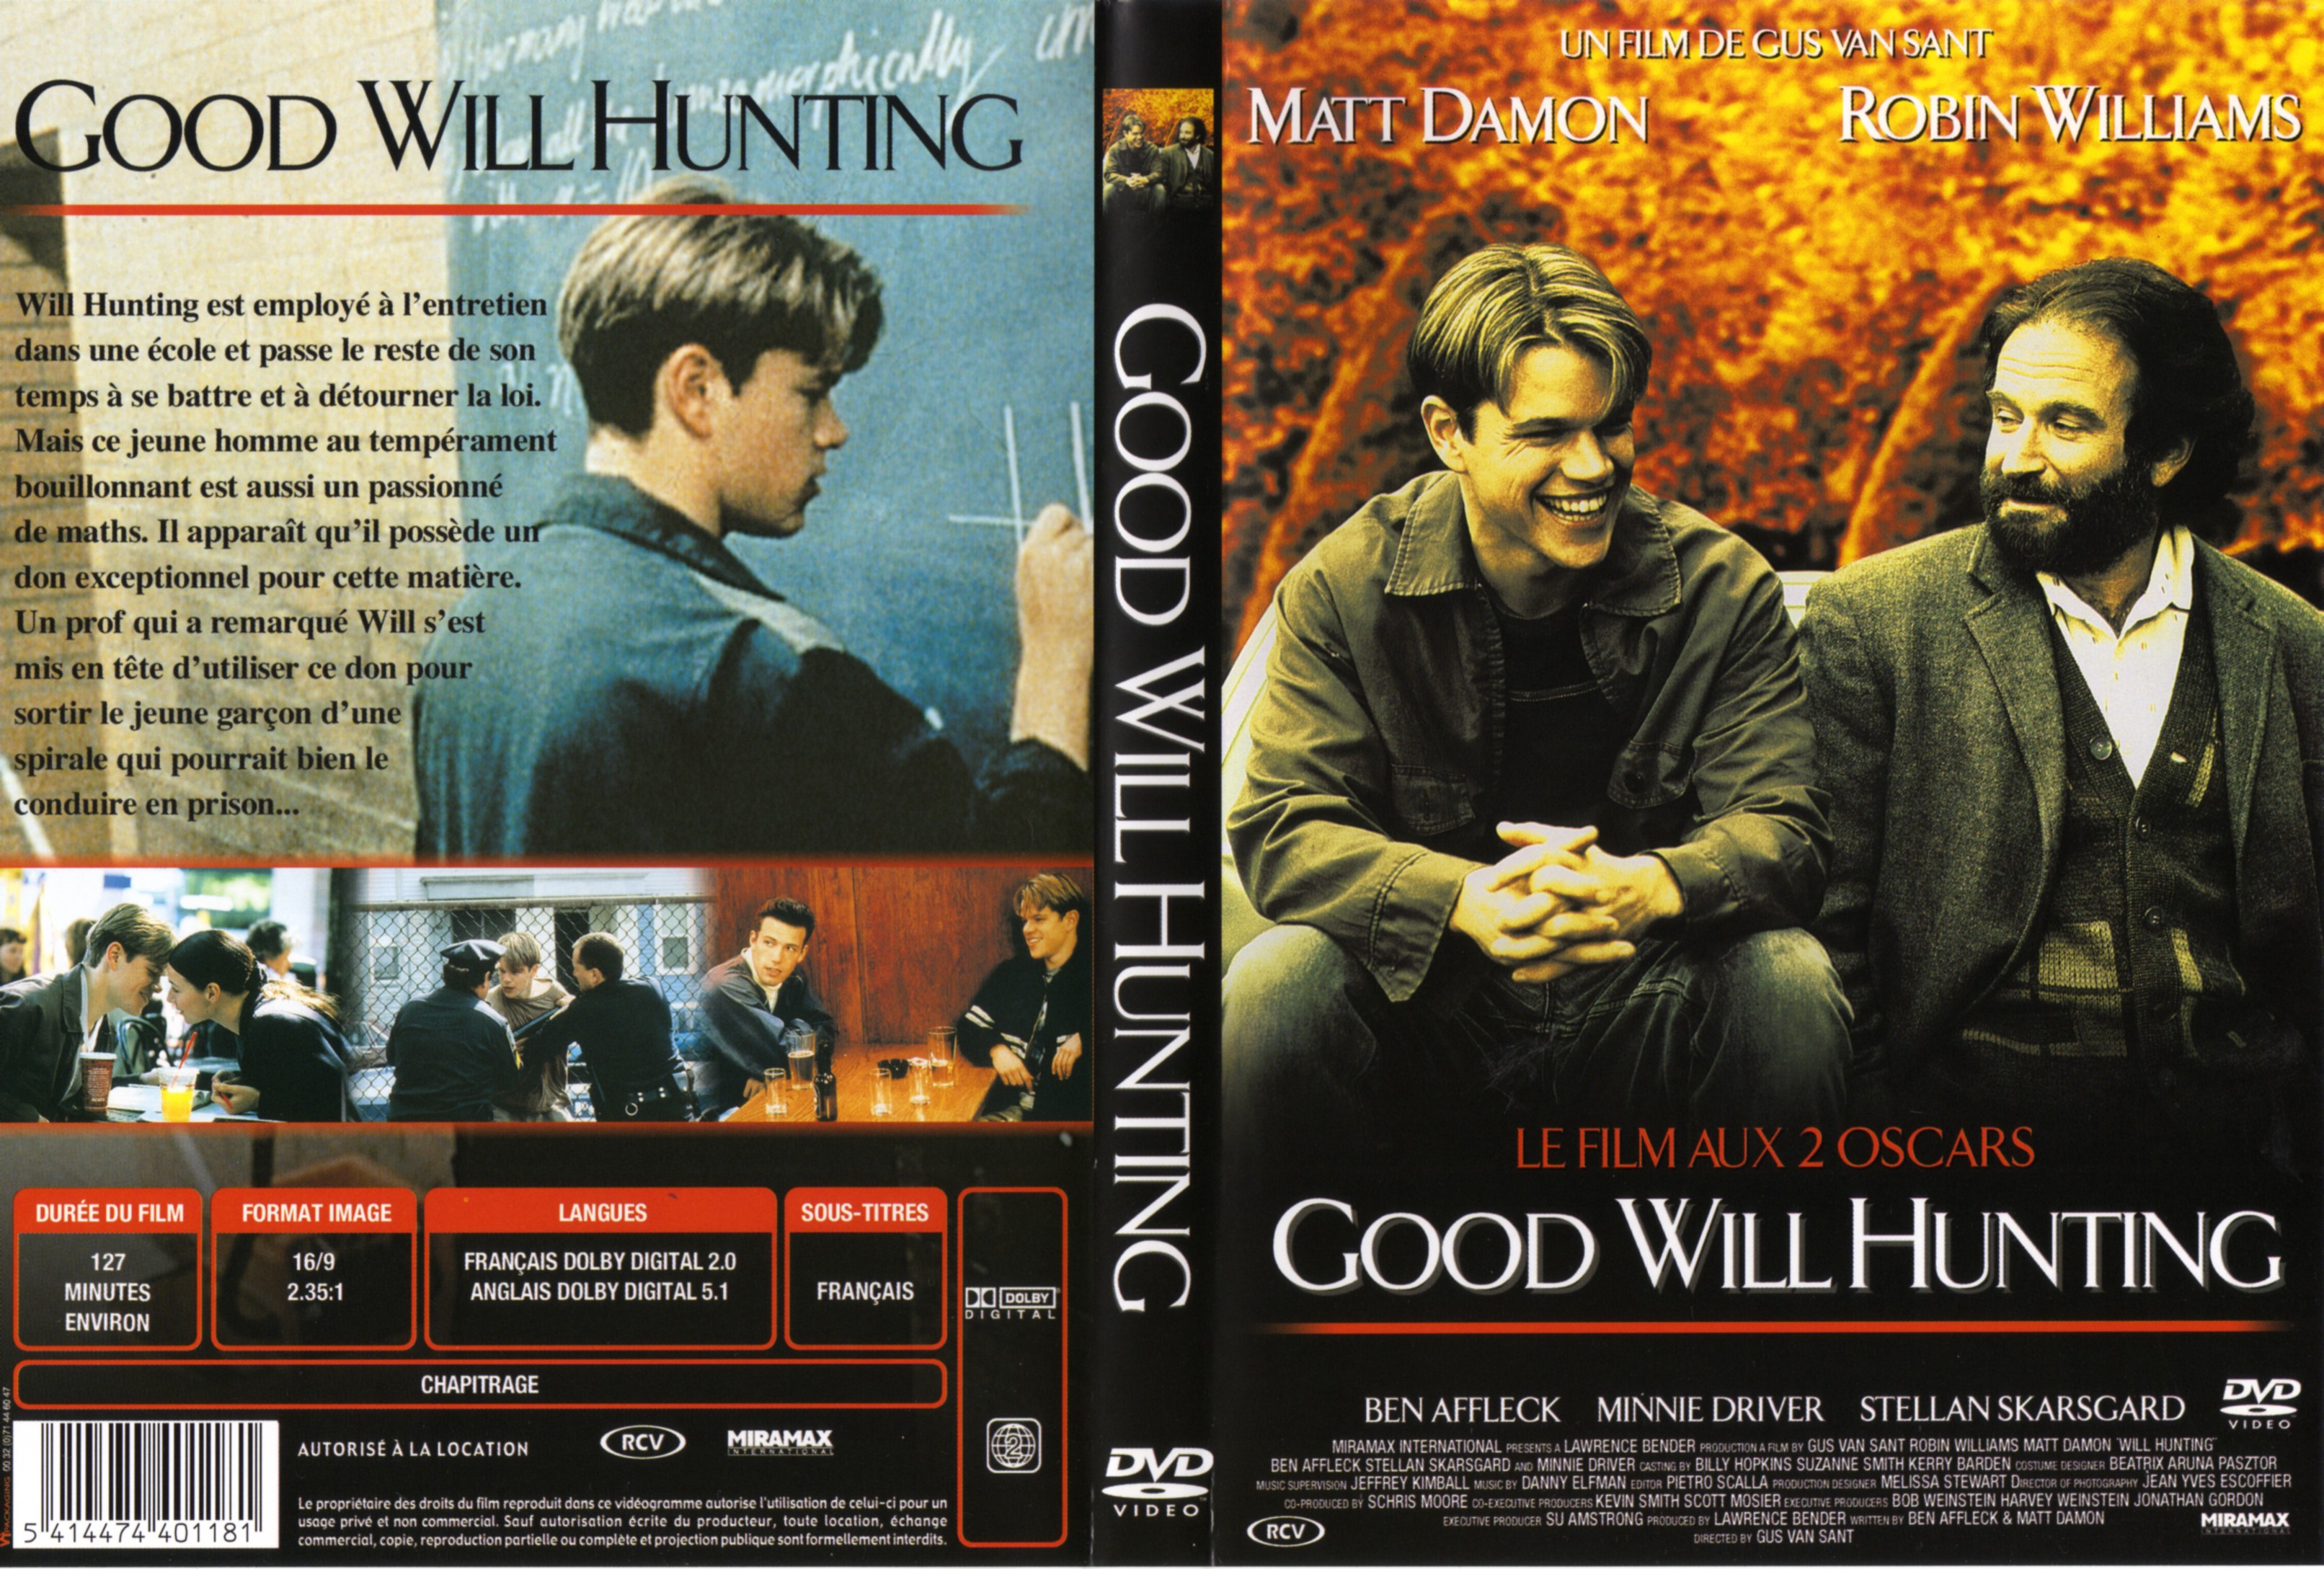 Jaquette DVD Will Hunting v2